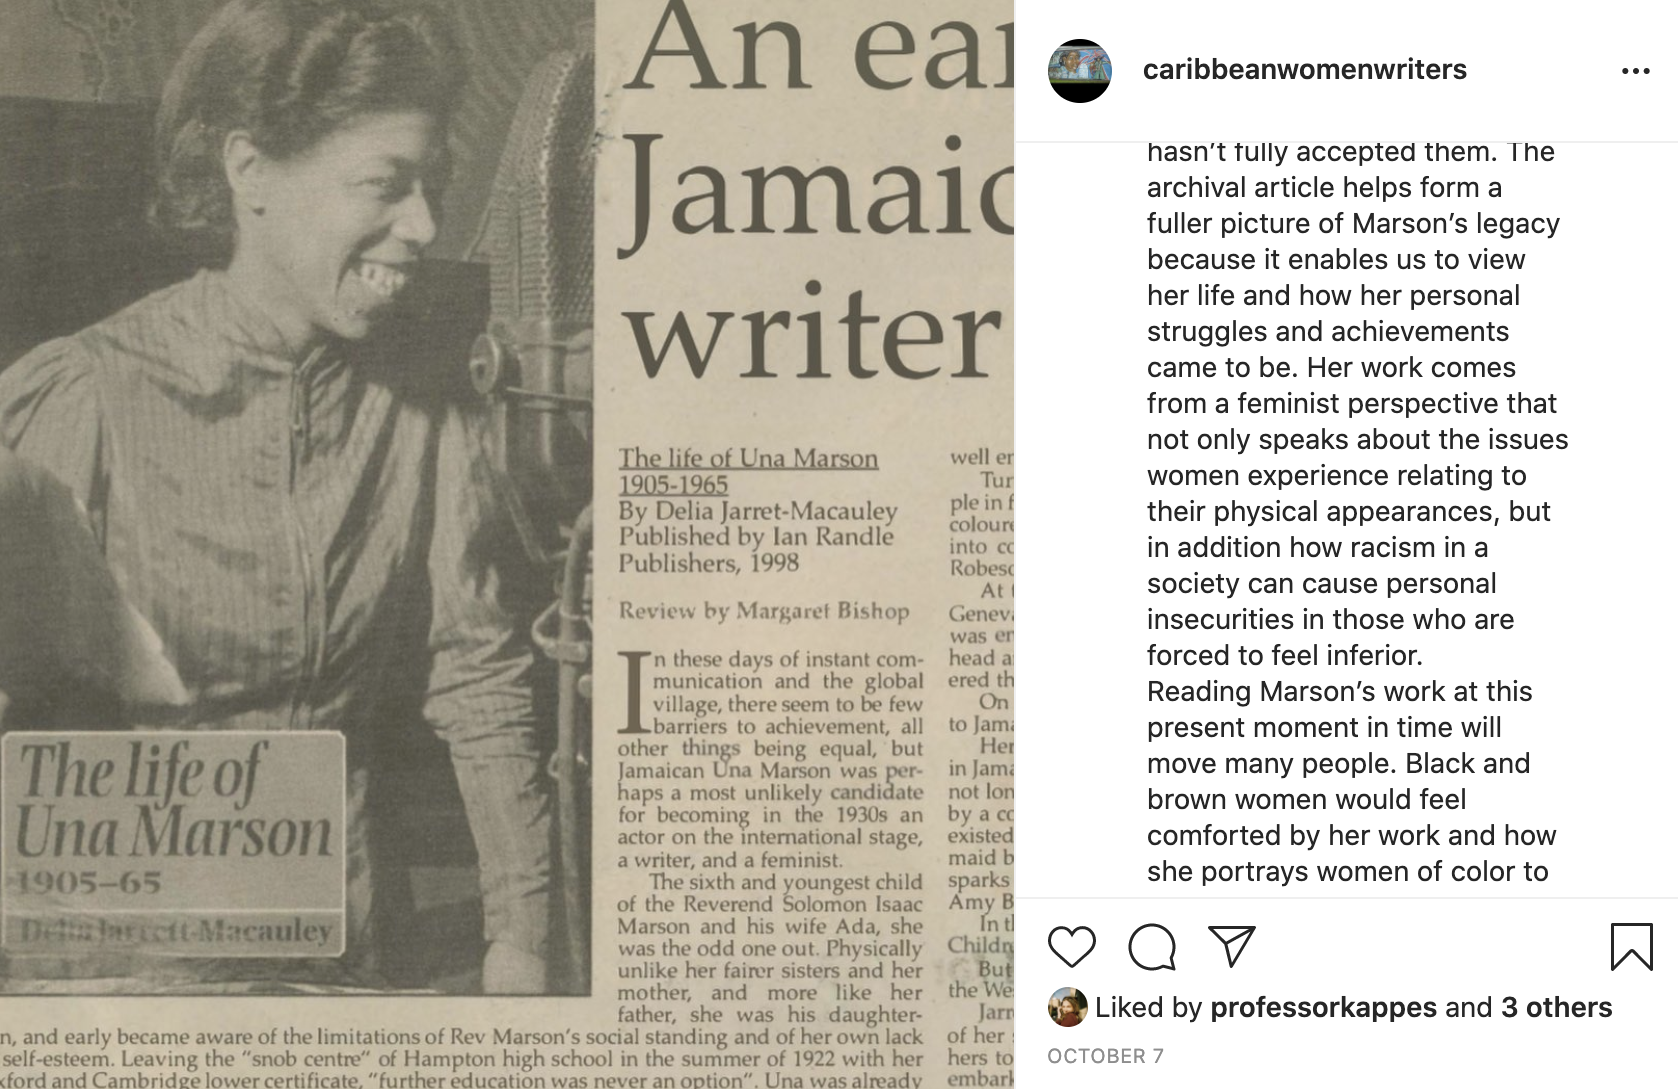 Fig. 3. Screenshot of student Instagram post of article “An early Jamaican writer” and commentary. On the left is a newspaper article with a large black-and-white photo of Una Marson. On the right is the account name (@caribbeanwomenwriters), a student-written caption, and text that signifies that the post has been “Liked by professorkappes and 3 others.”